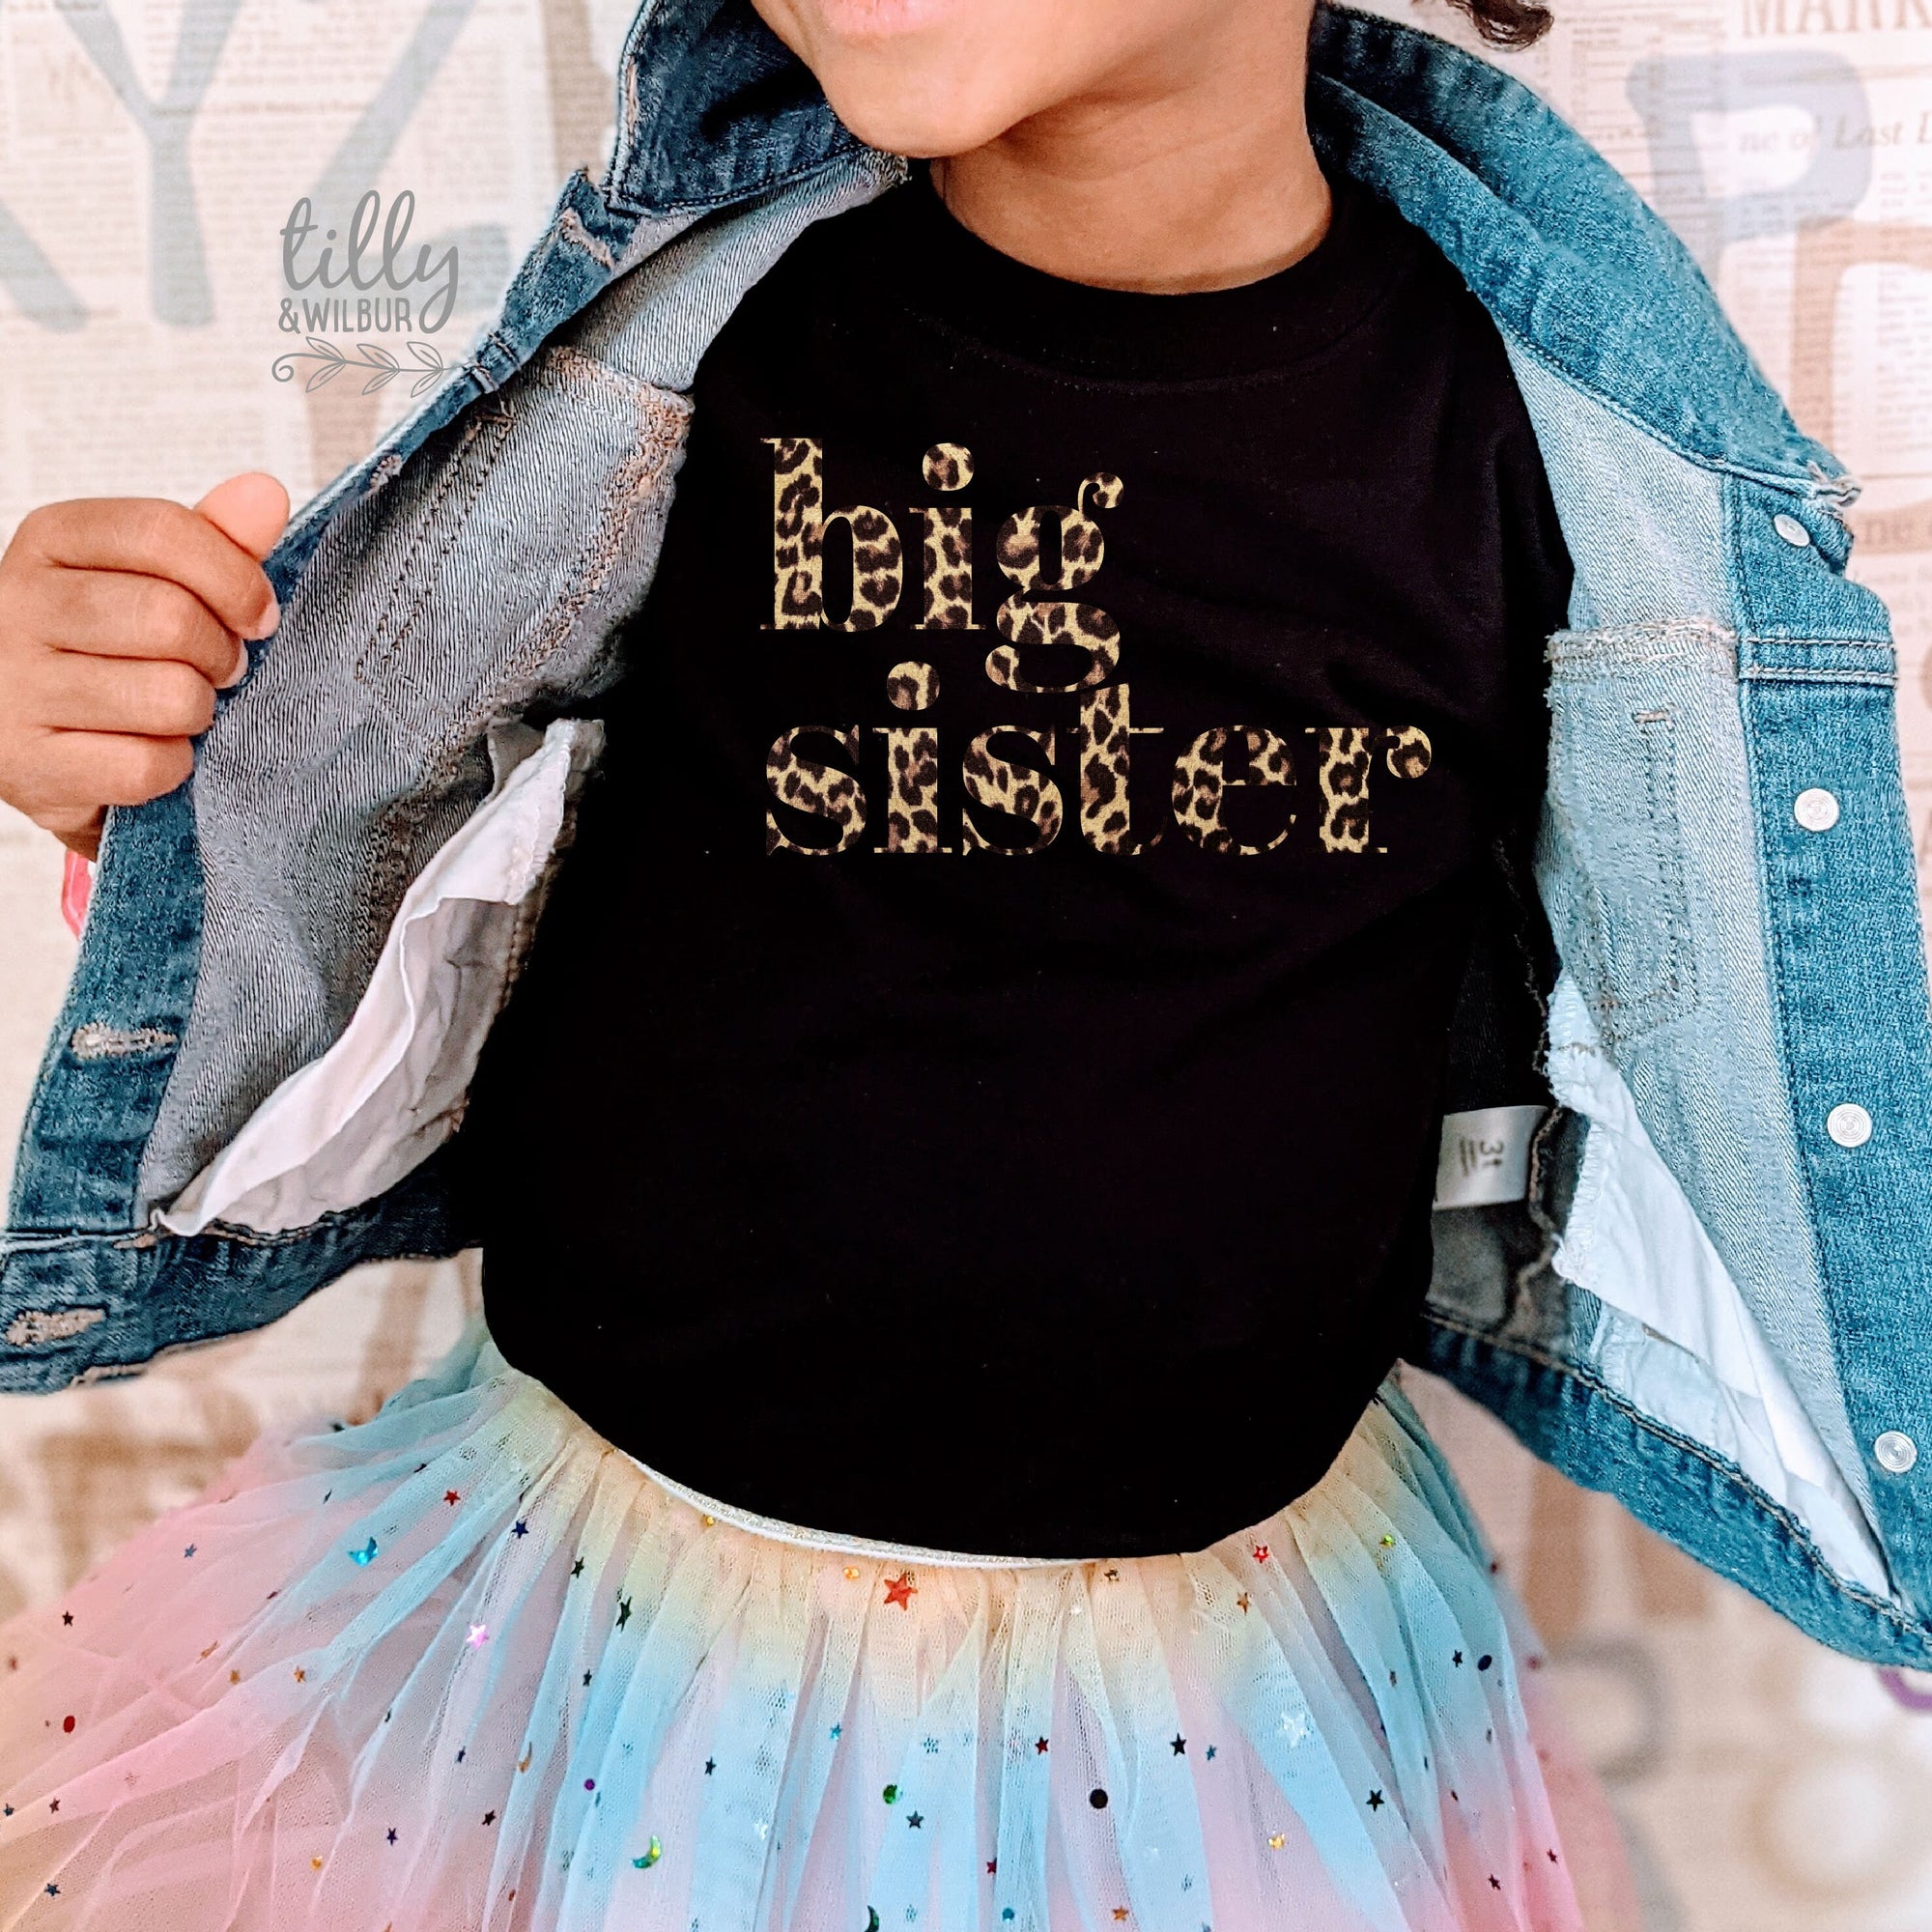 Big Sister T-Shirt, Promoted To Big Sister T-Shirt, Big Sister Gift, Leopard Print Tee, Pregnancy Announcement, I'm Going To Be A Big Sister